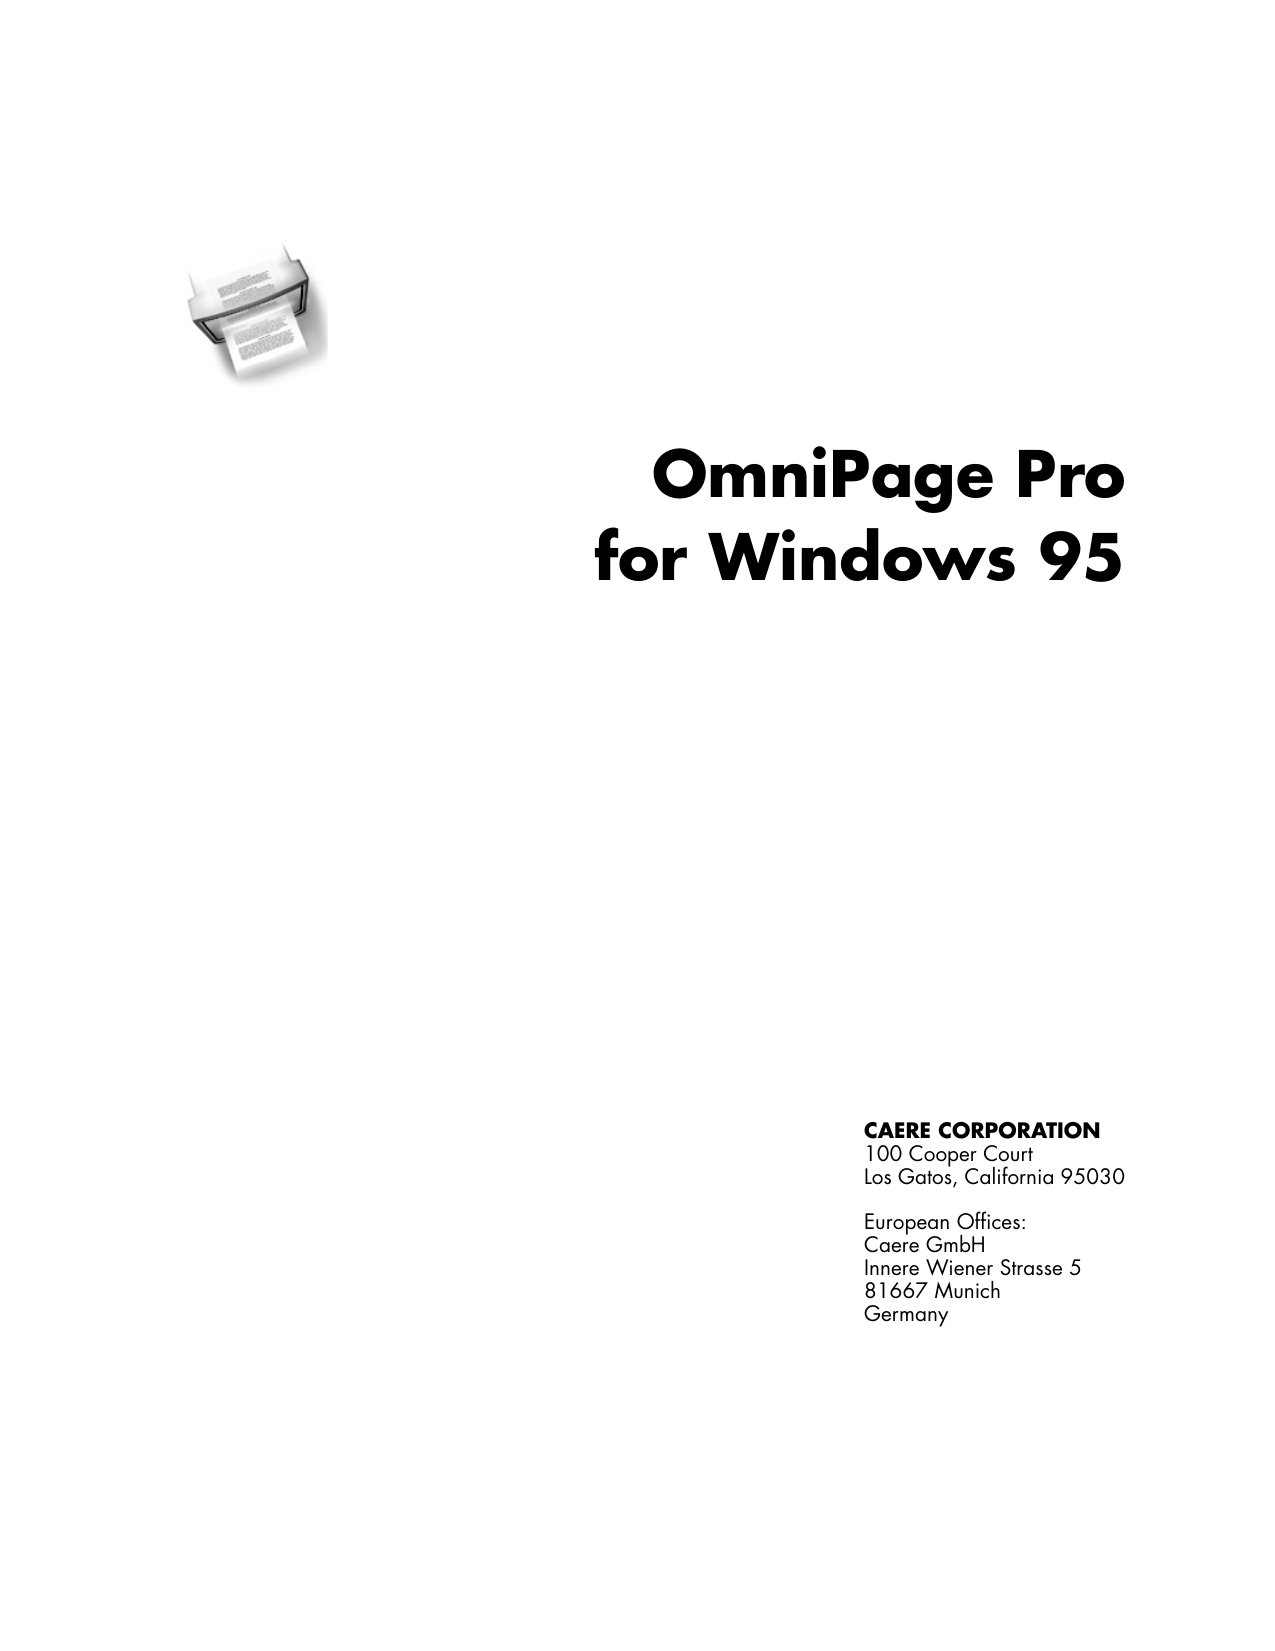 omnipage pro in startup